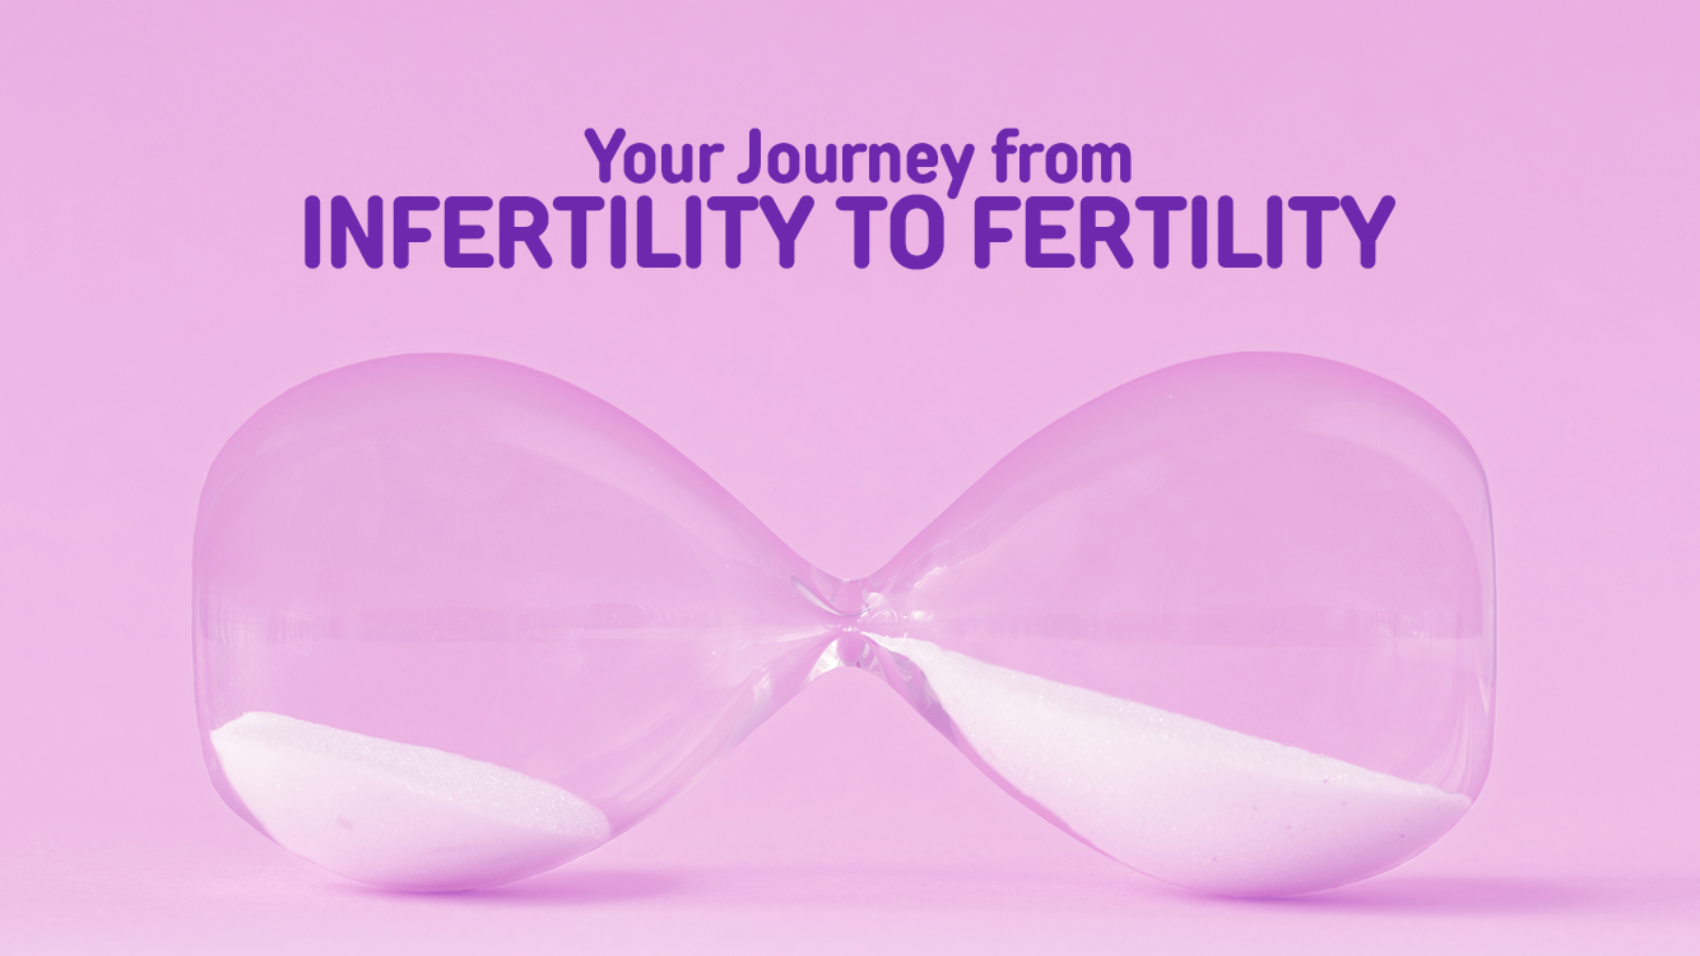 Your Hourney from infertility to fertility